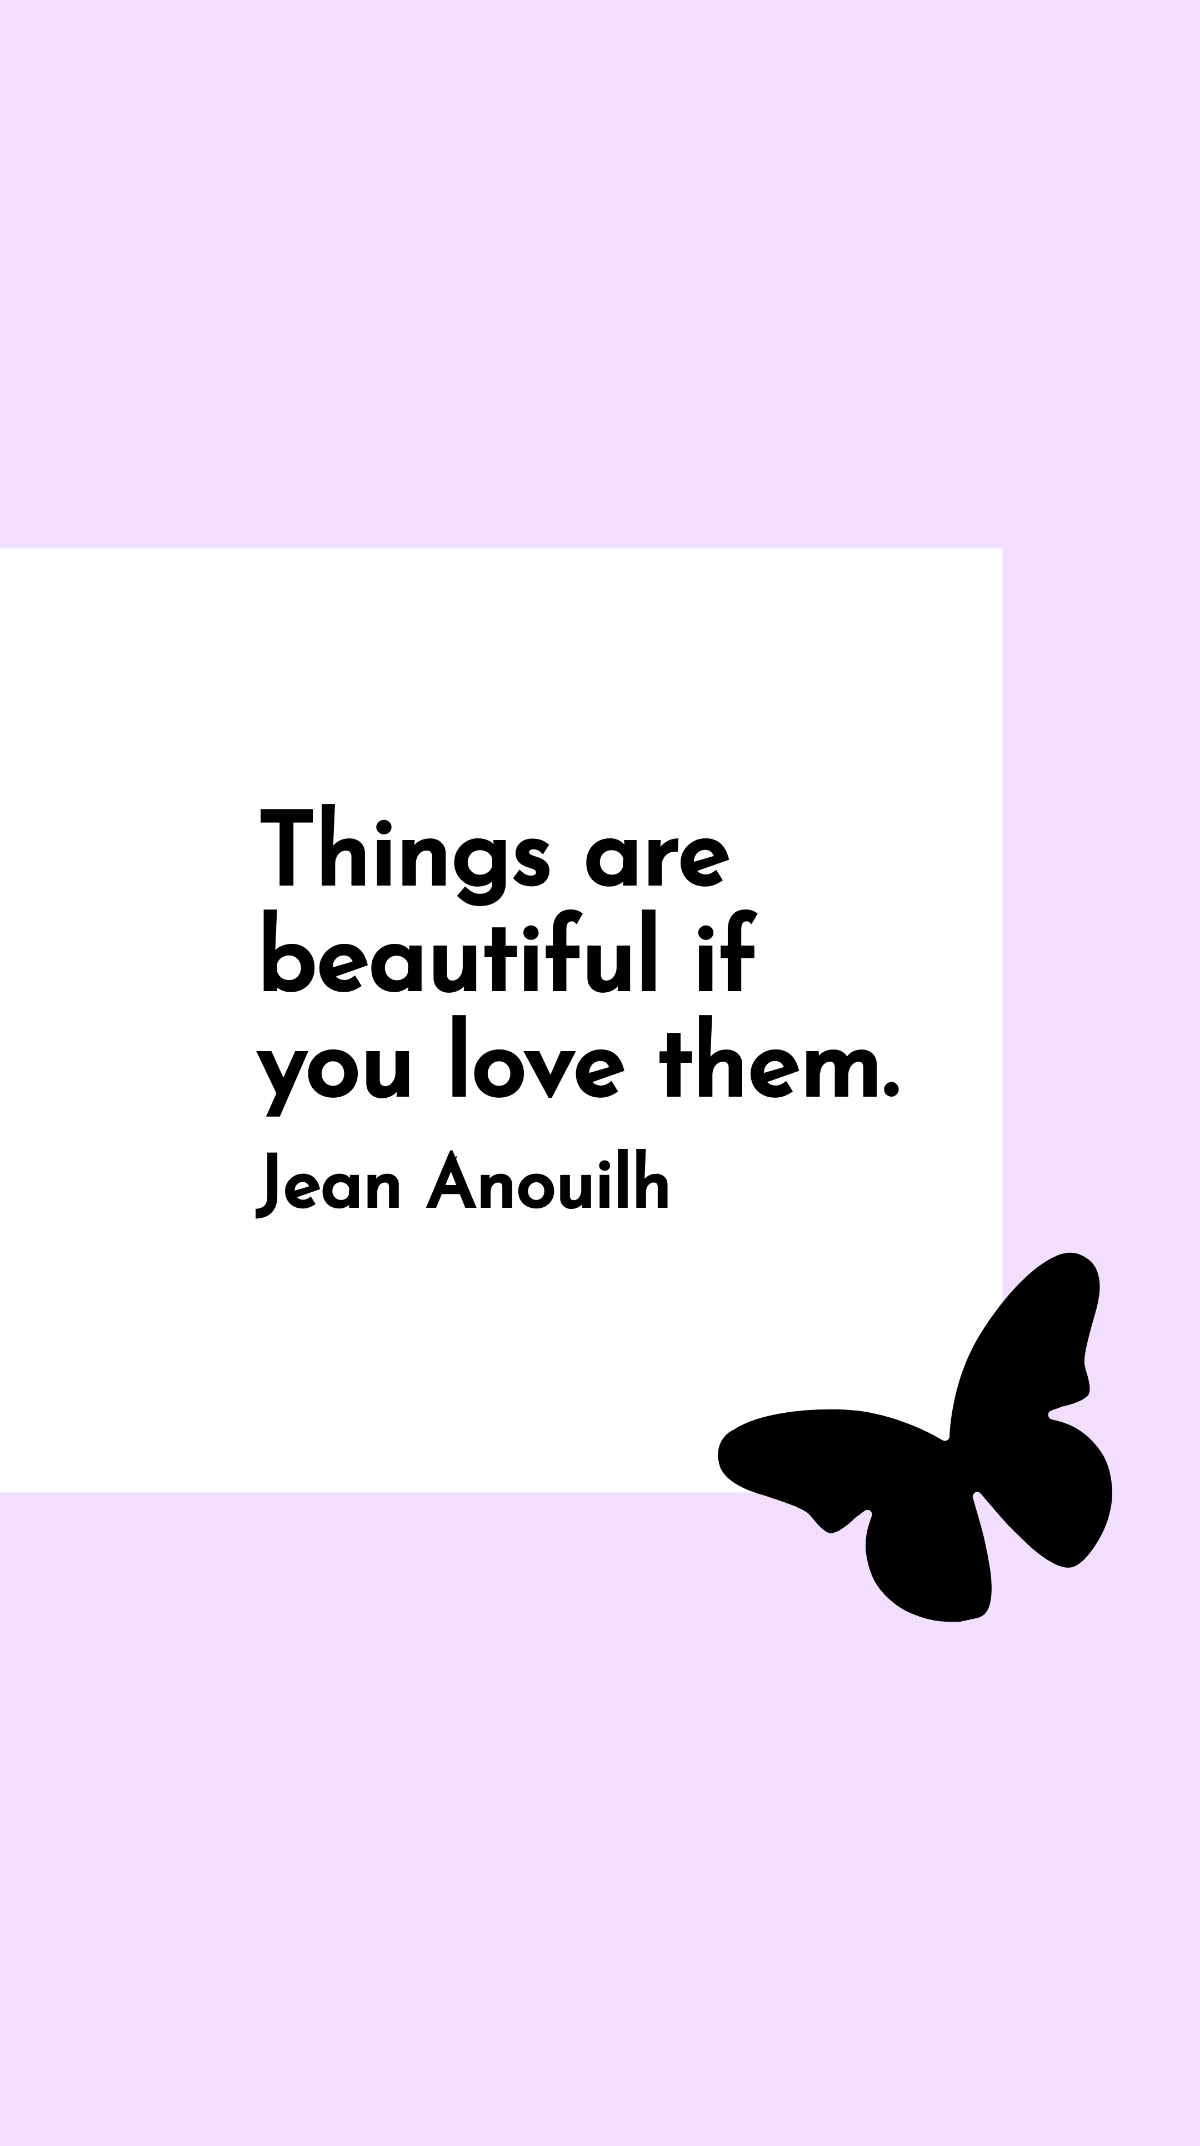 Free Jean Anouilh - Things are beautiful if you love them. Template